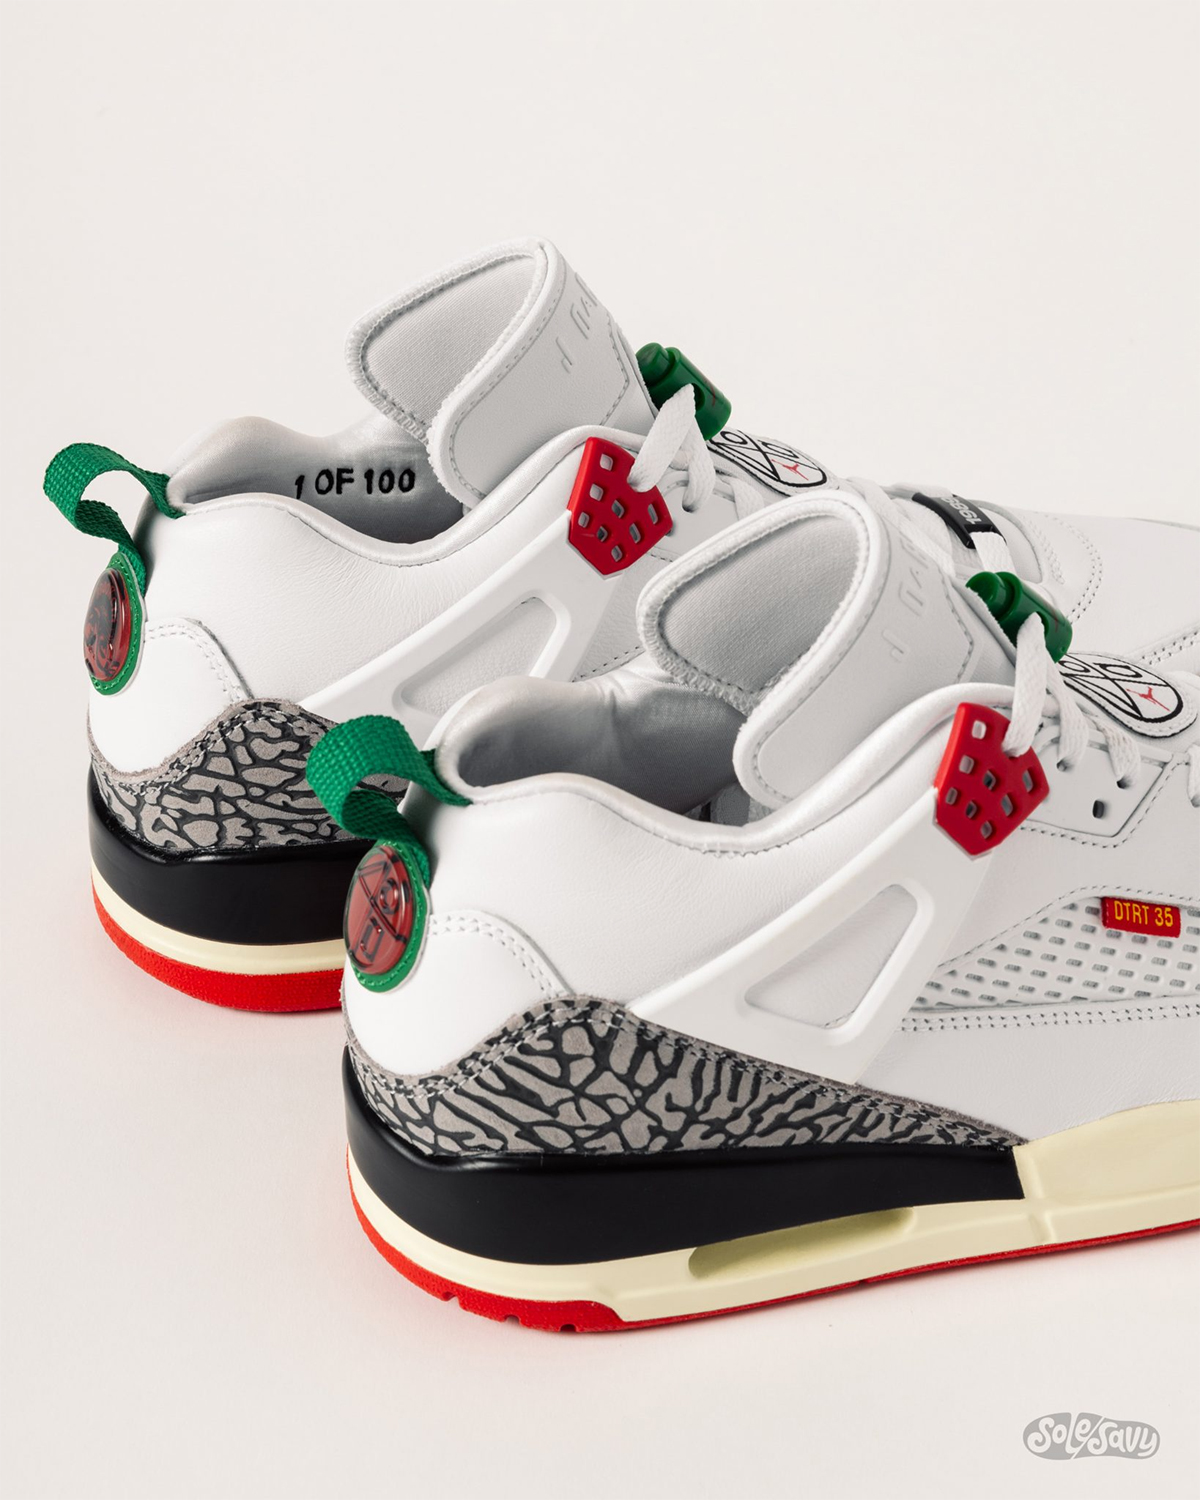 Jordan Spizike Low Do The Right Thing 35th Anniversary 2